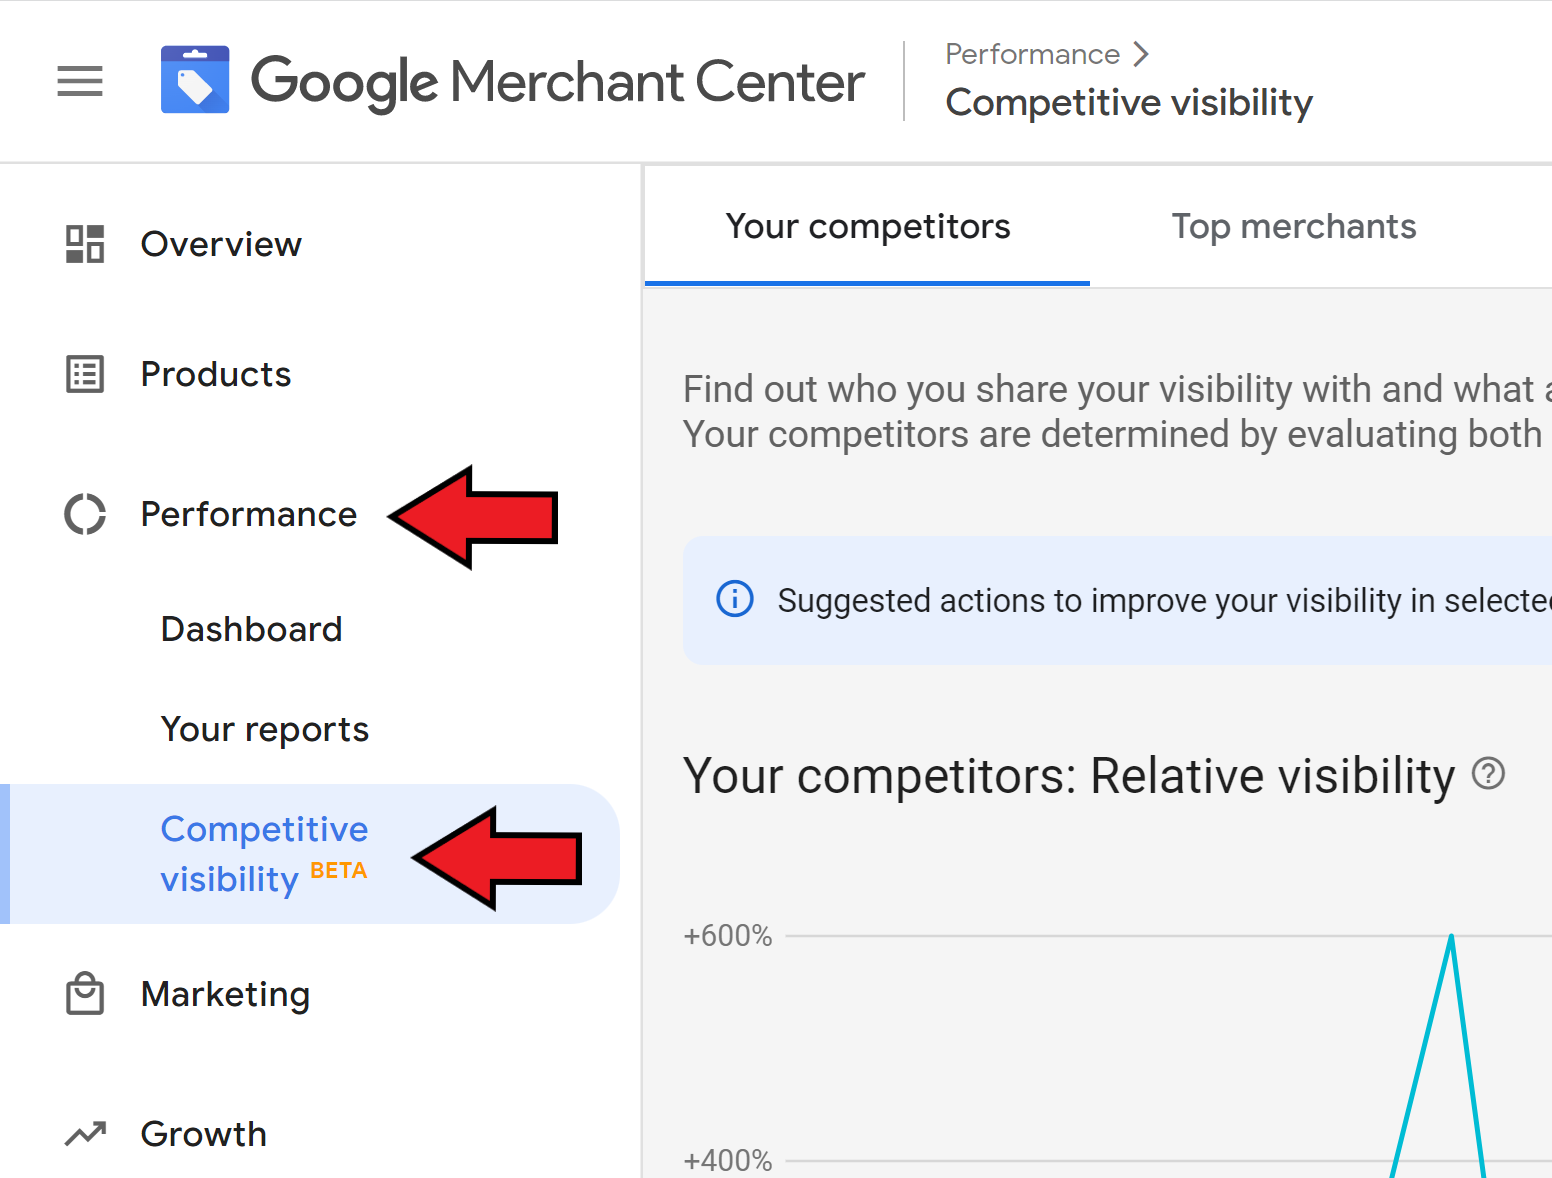 How to access the Competitive Visibility report